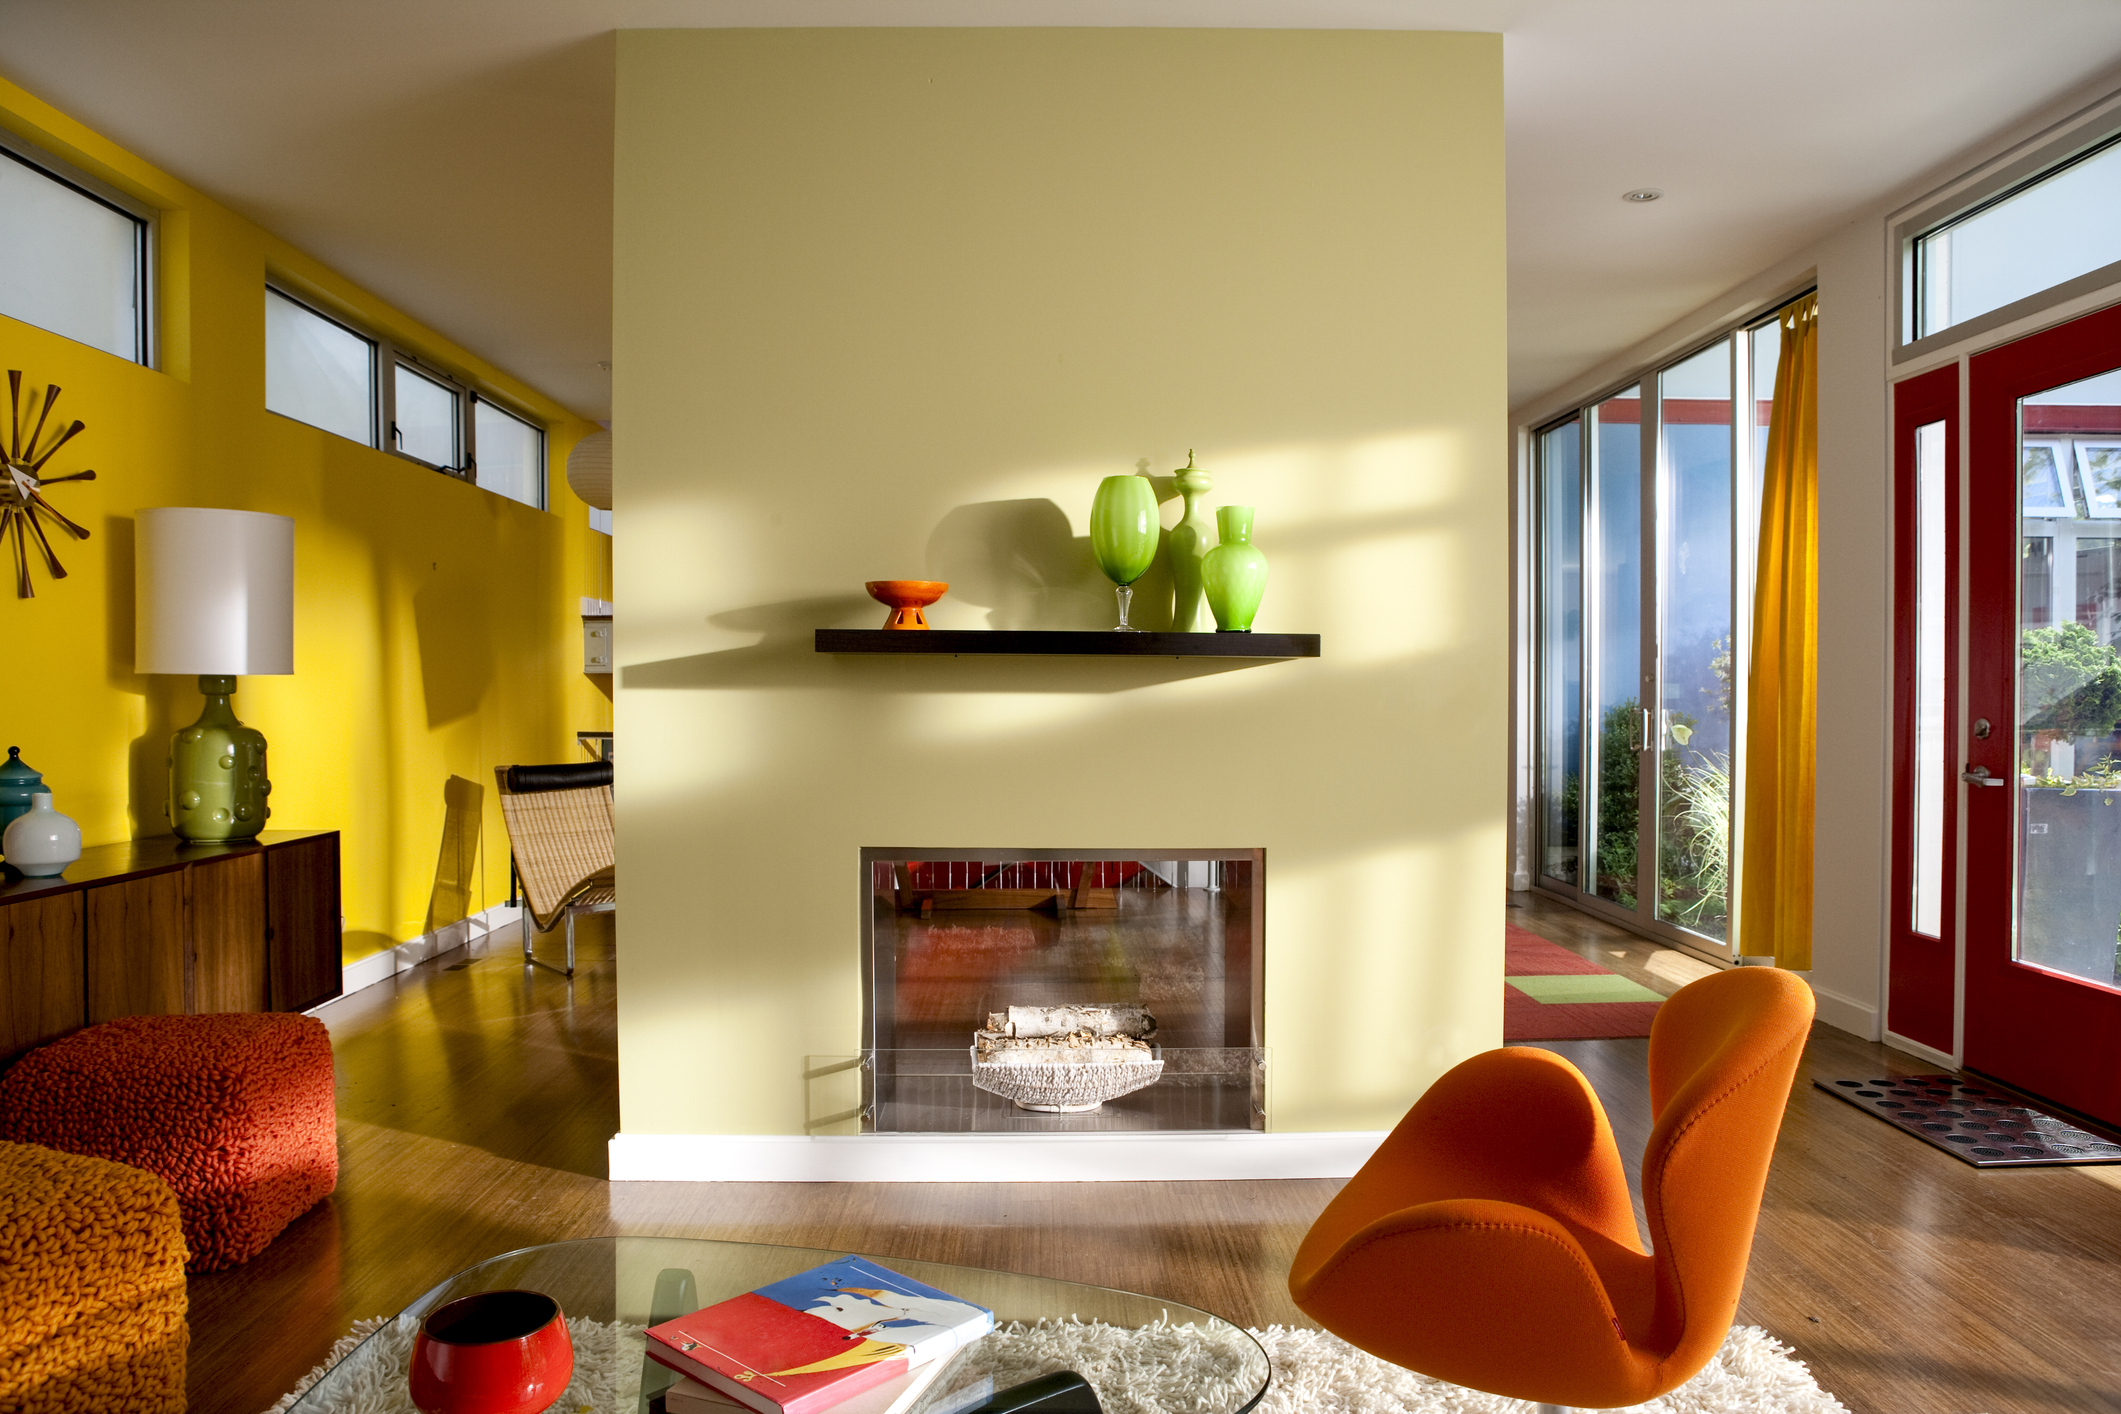 Interior room with modern furniture a fireplace and a vibrant orange chair